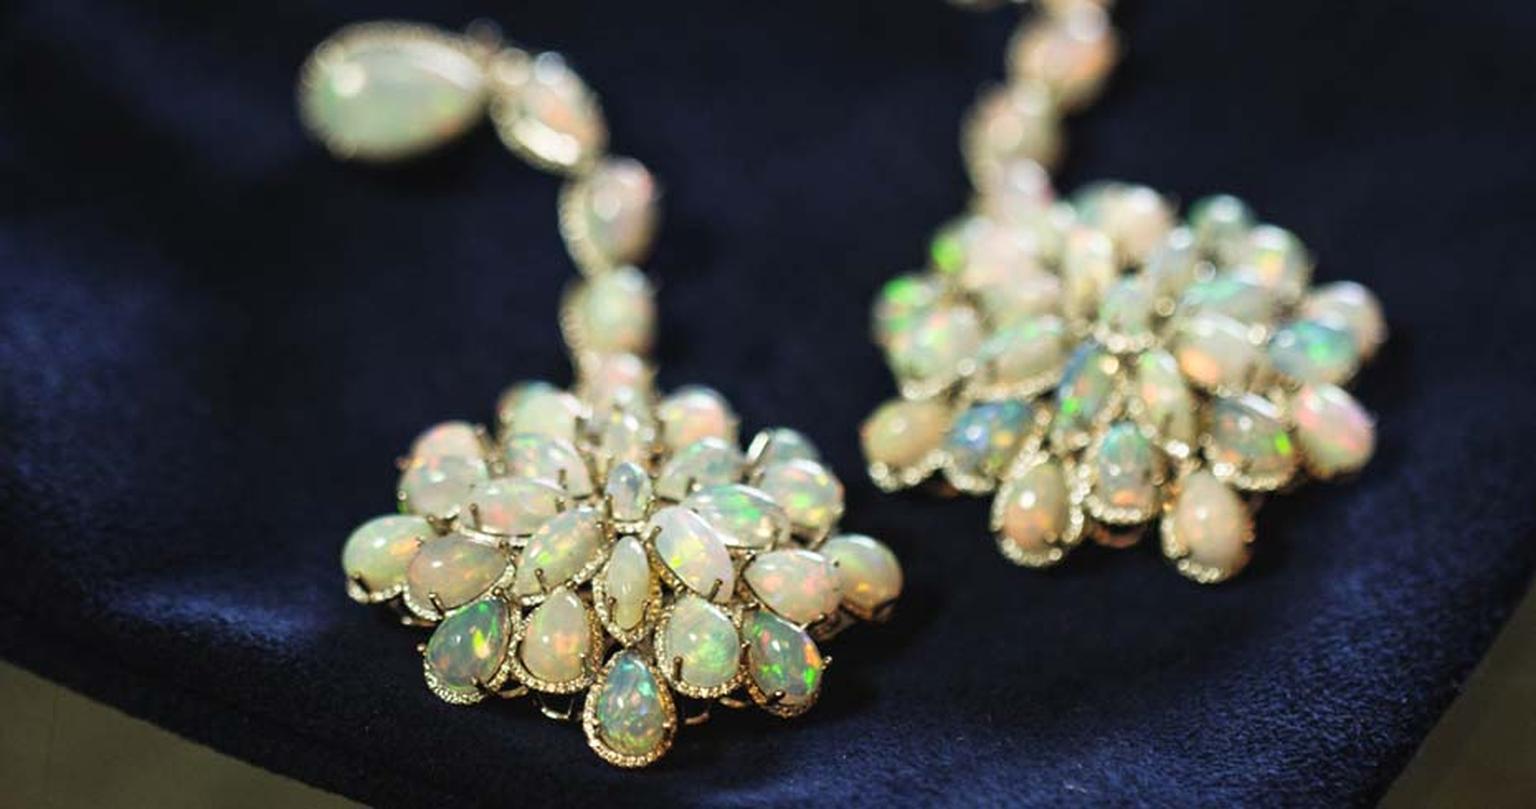 The Jewellery Editor's red carpet correspondent, Rachel Garrahan, met with Chopard in LA to view the exceptional opal earrings worn by Cate Blanchett on the Oscars 2014 red carpet